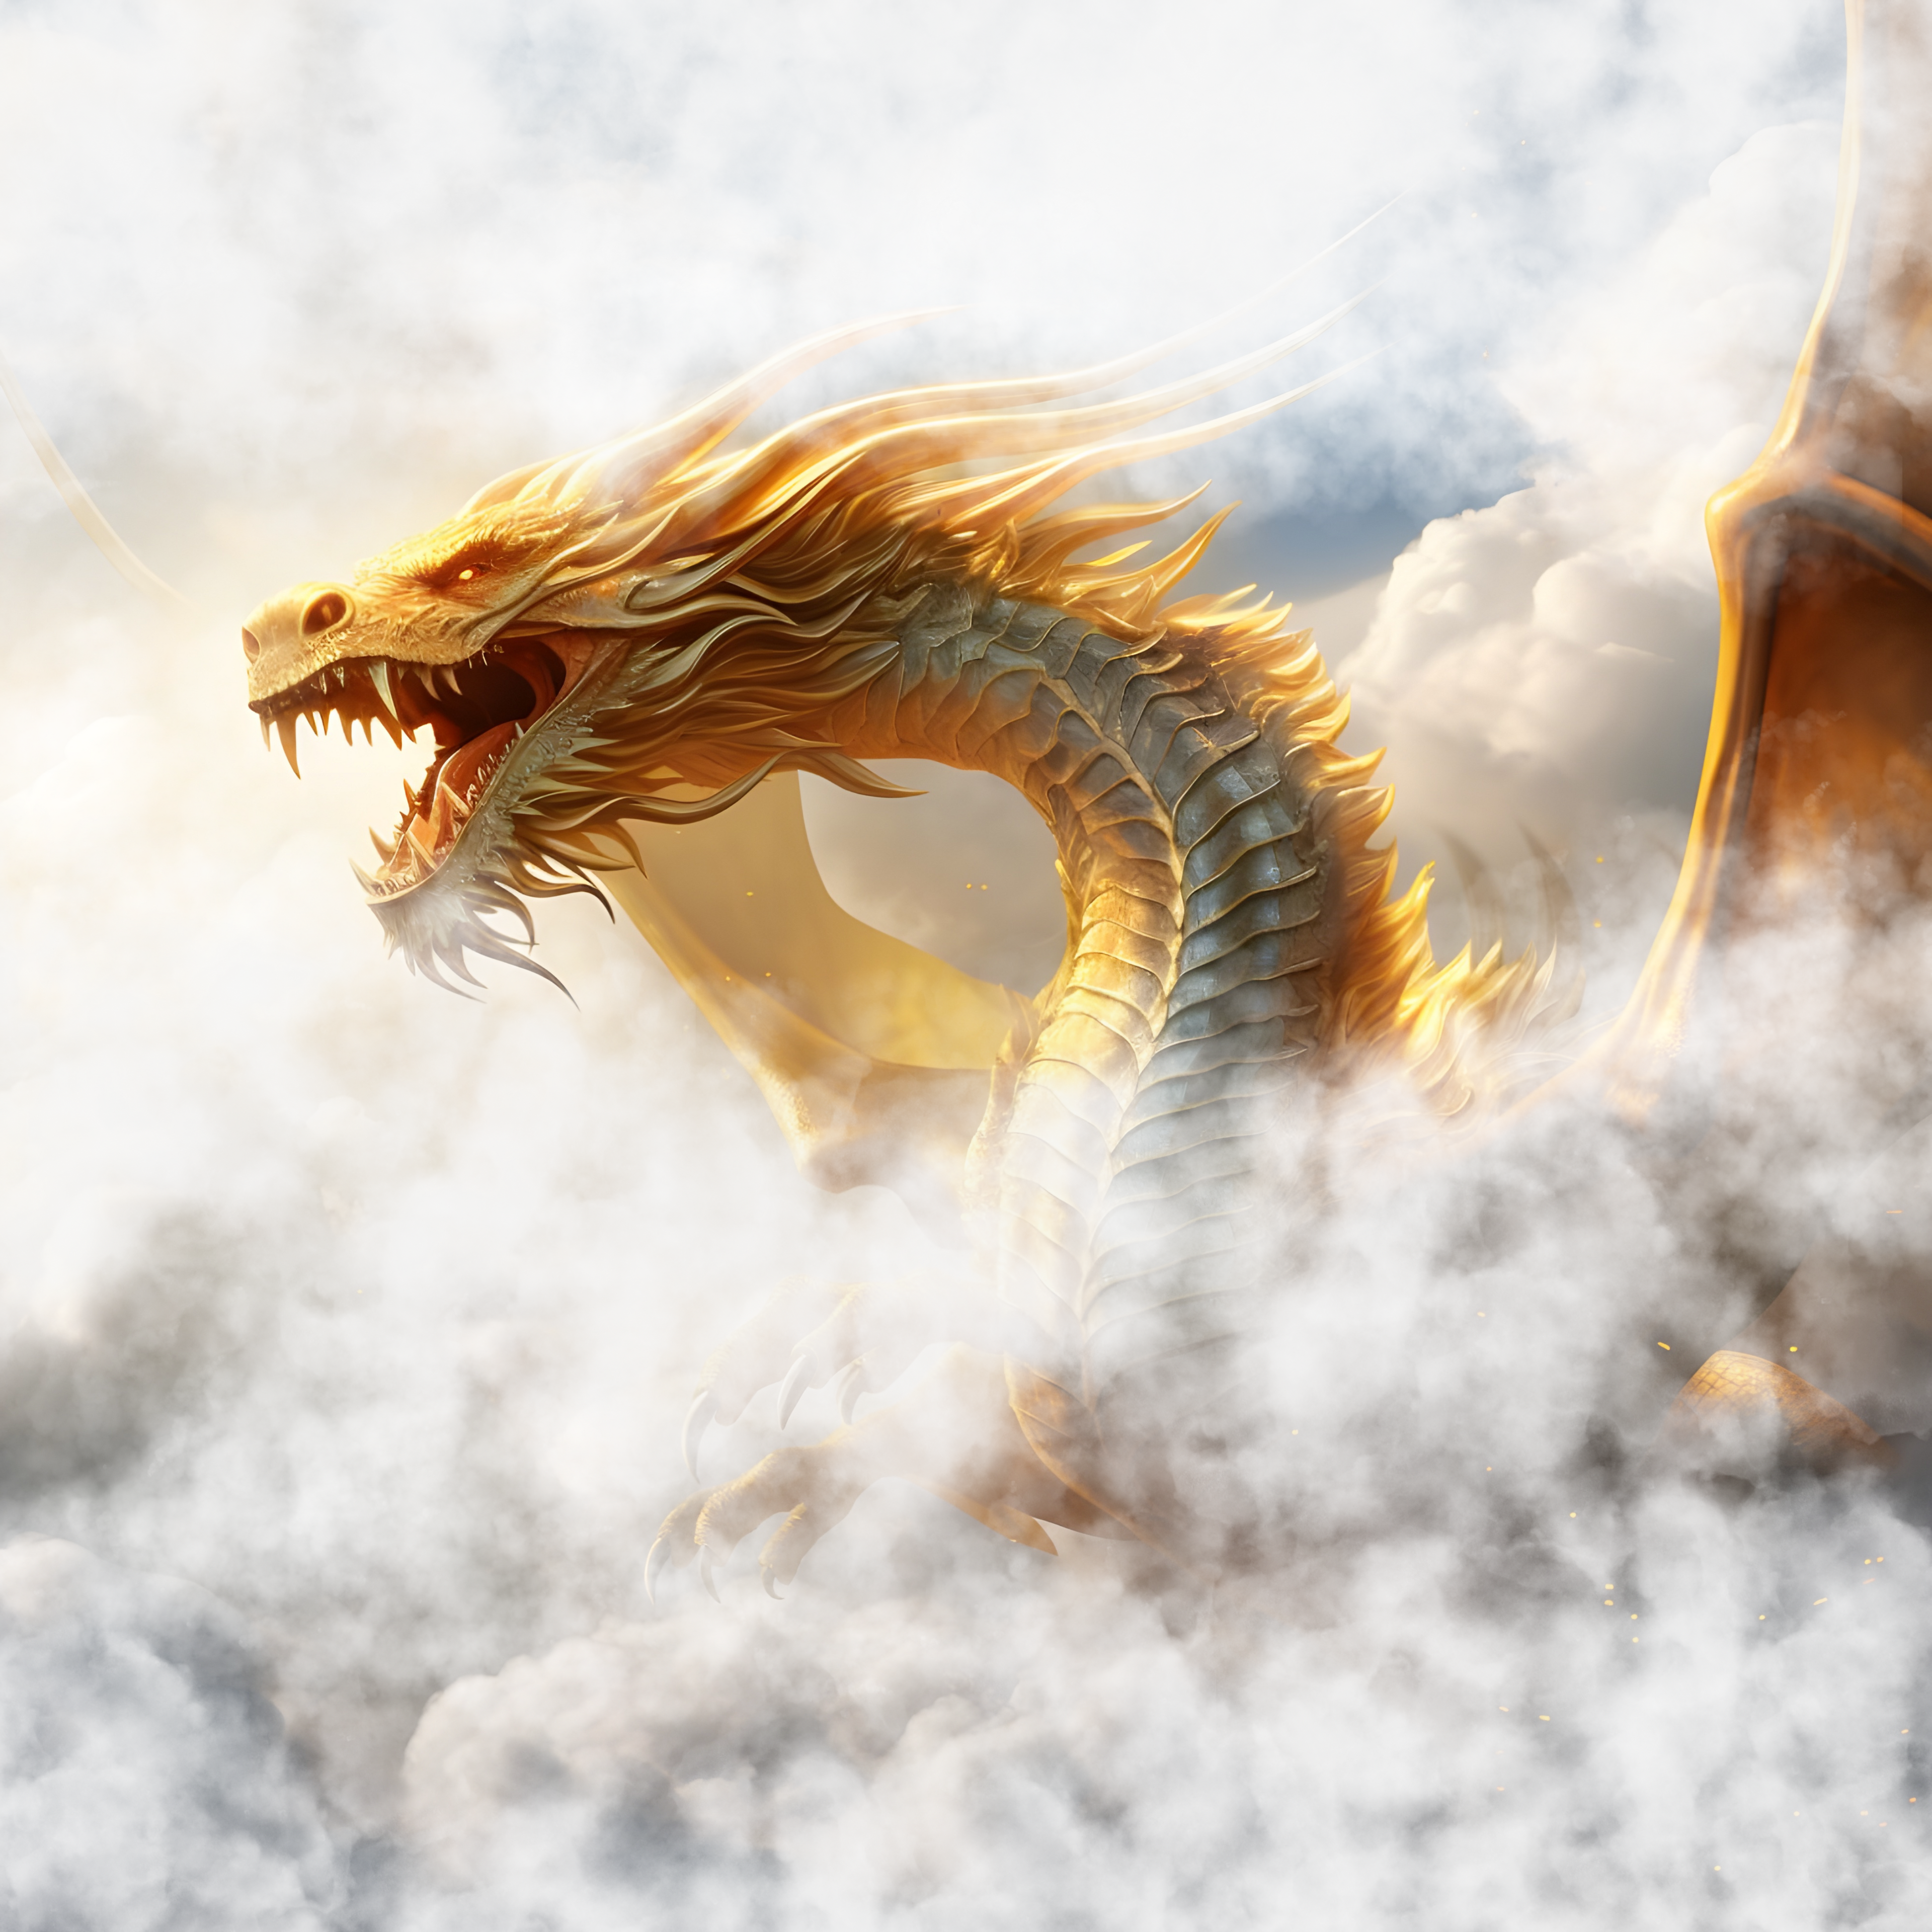 The Golden Dragon in Clouds